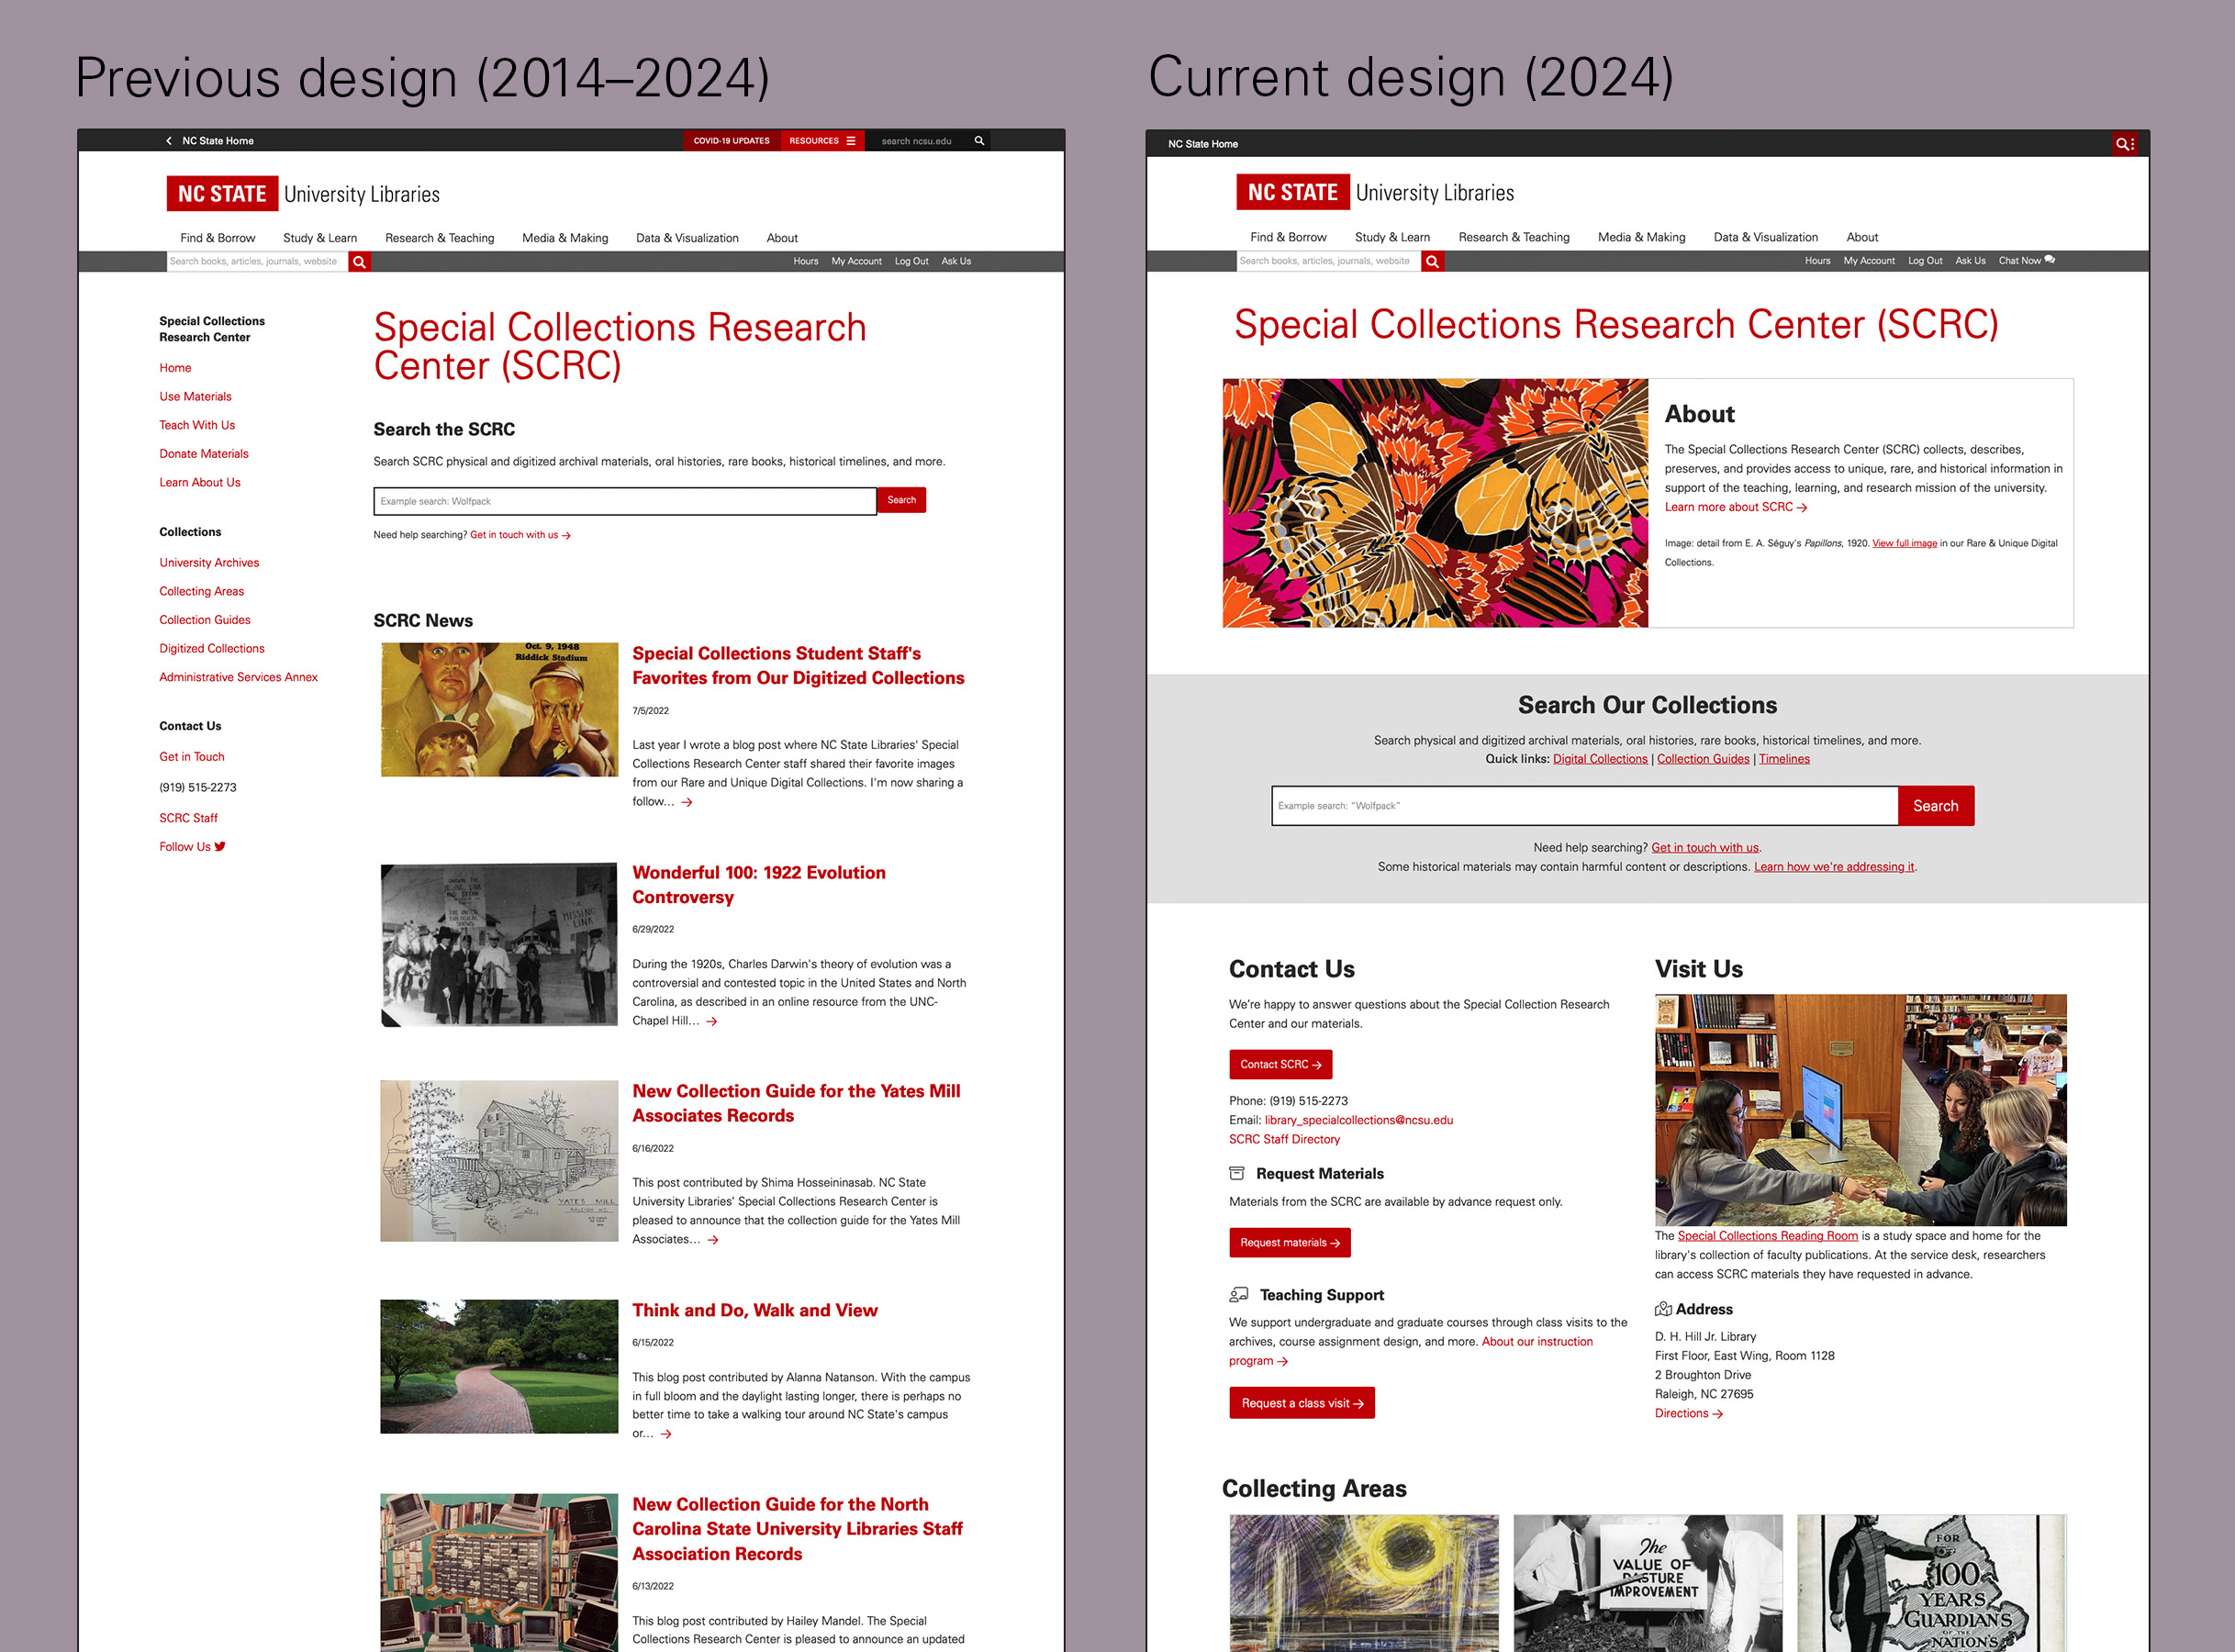 Comparison of previous design, in use since 2014 with most page space given to news posts, and current design, with most page space given to search and contact/visit options